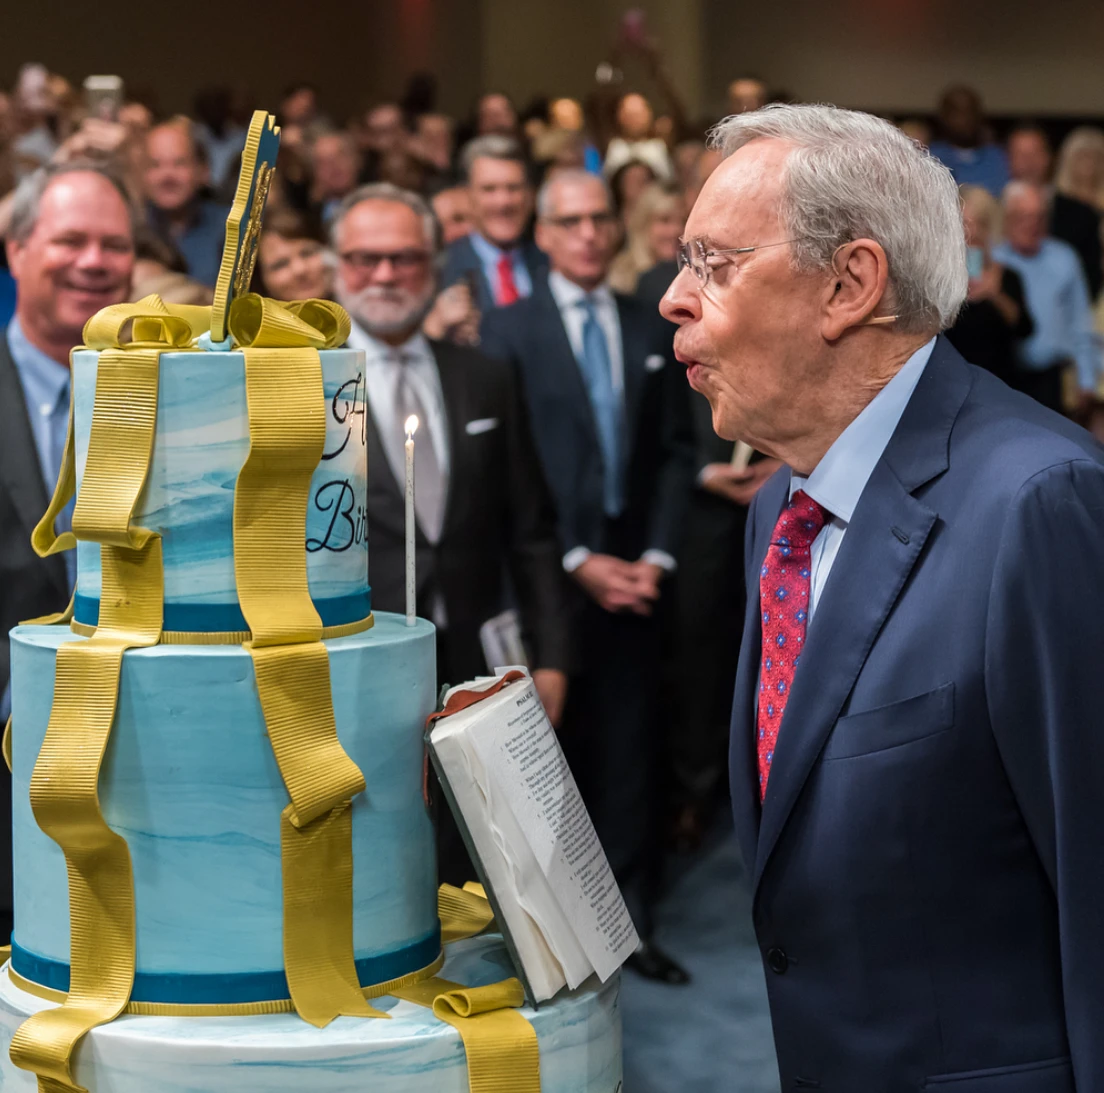 Dr. Stanley celebrated his 85th birthday with the congregation of First Baptist Atlanta on September 24, 2017.